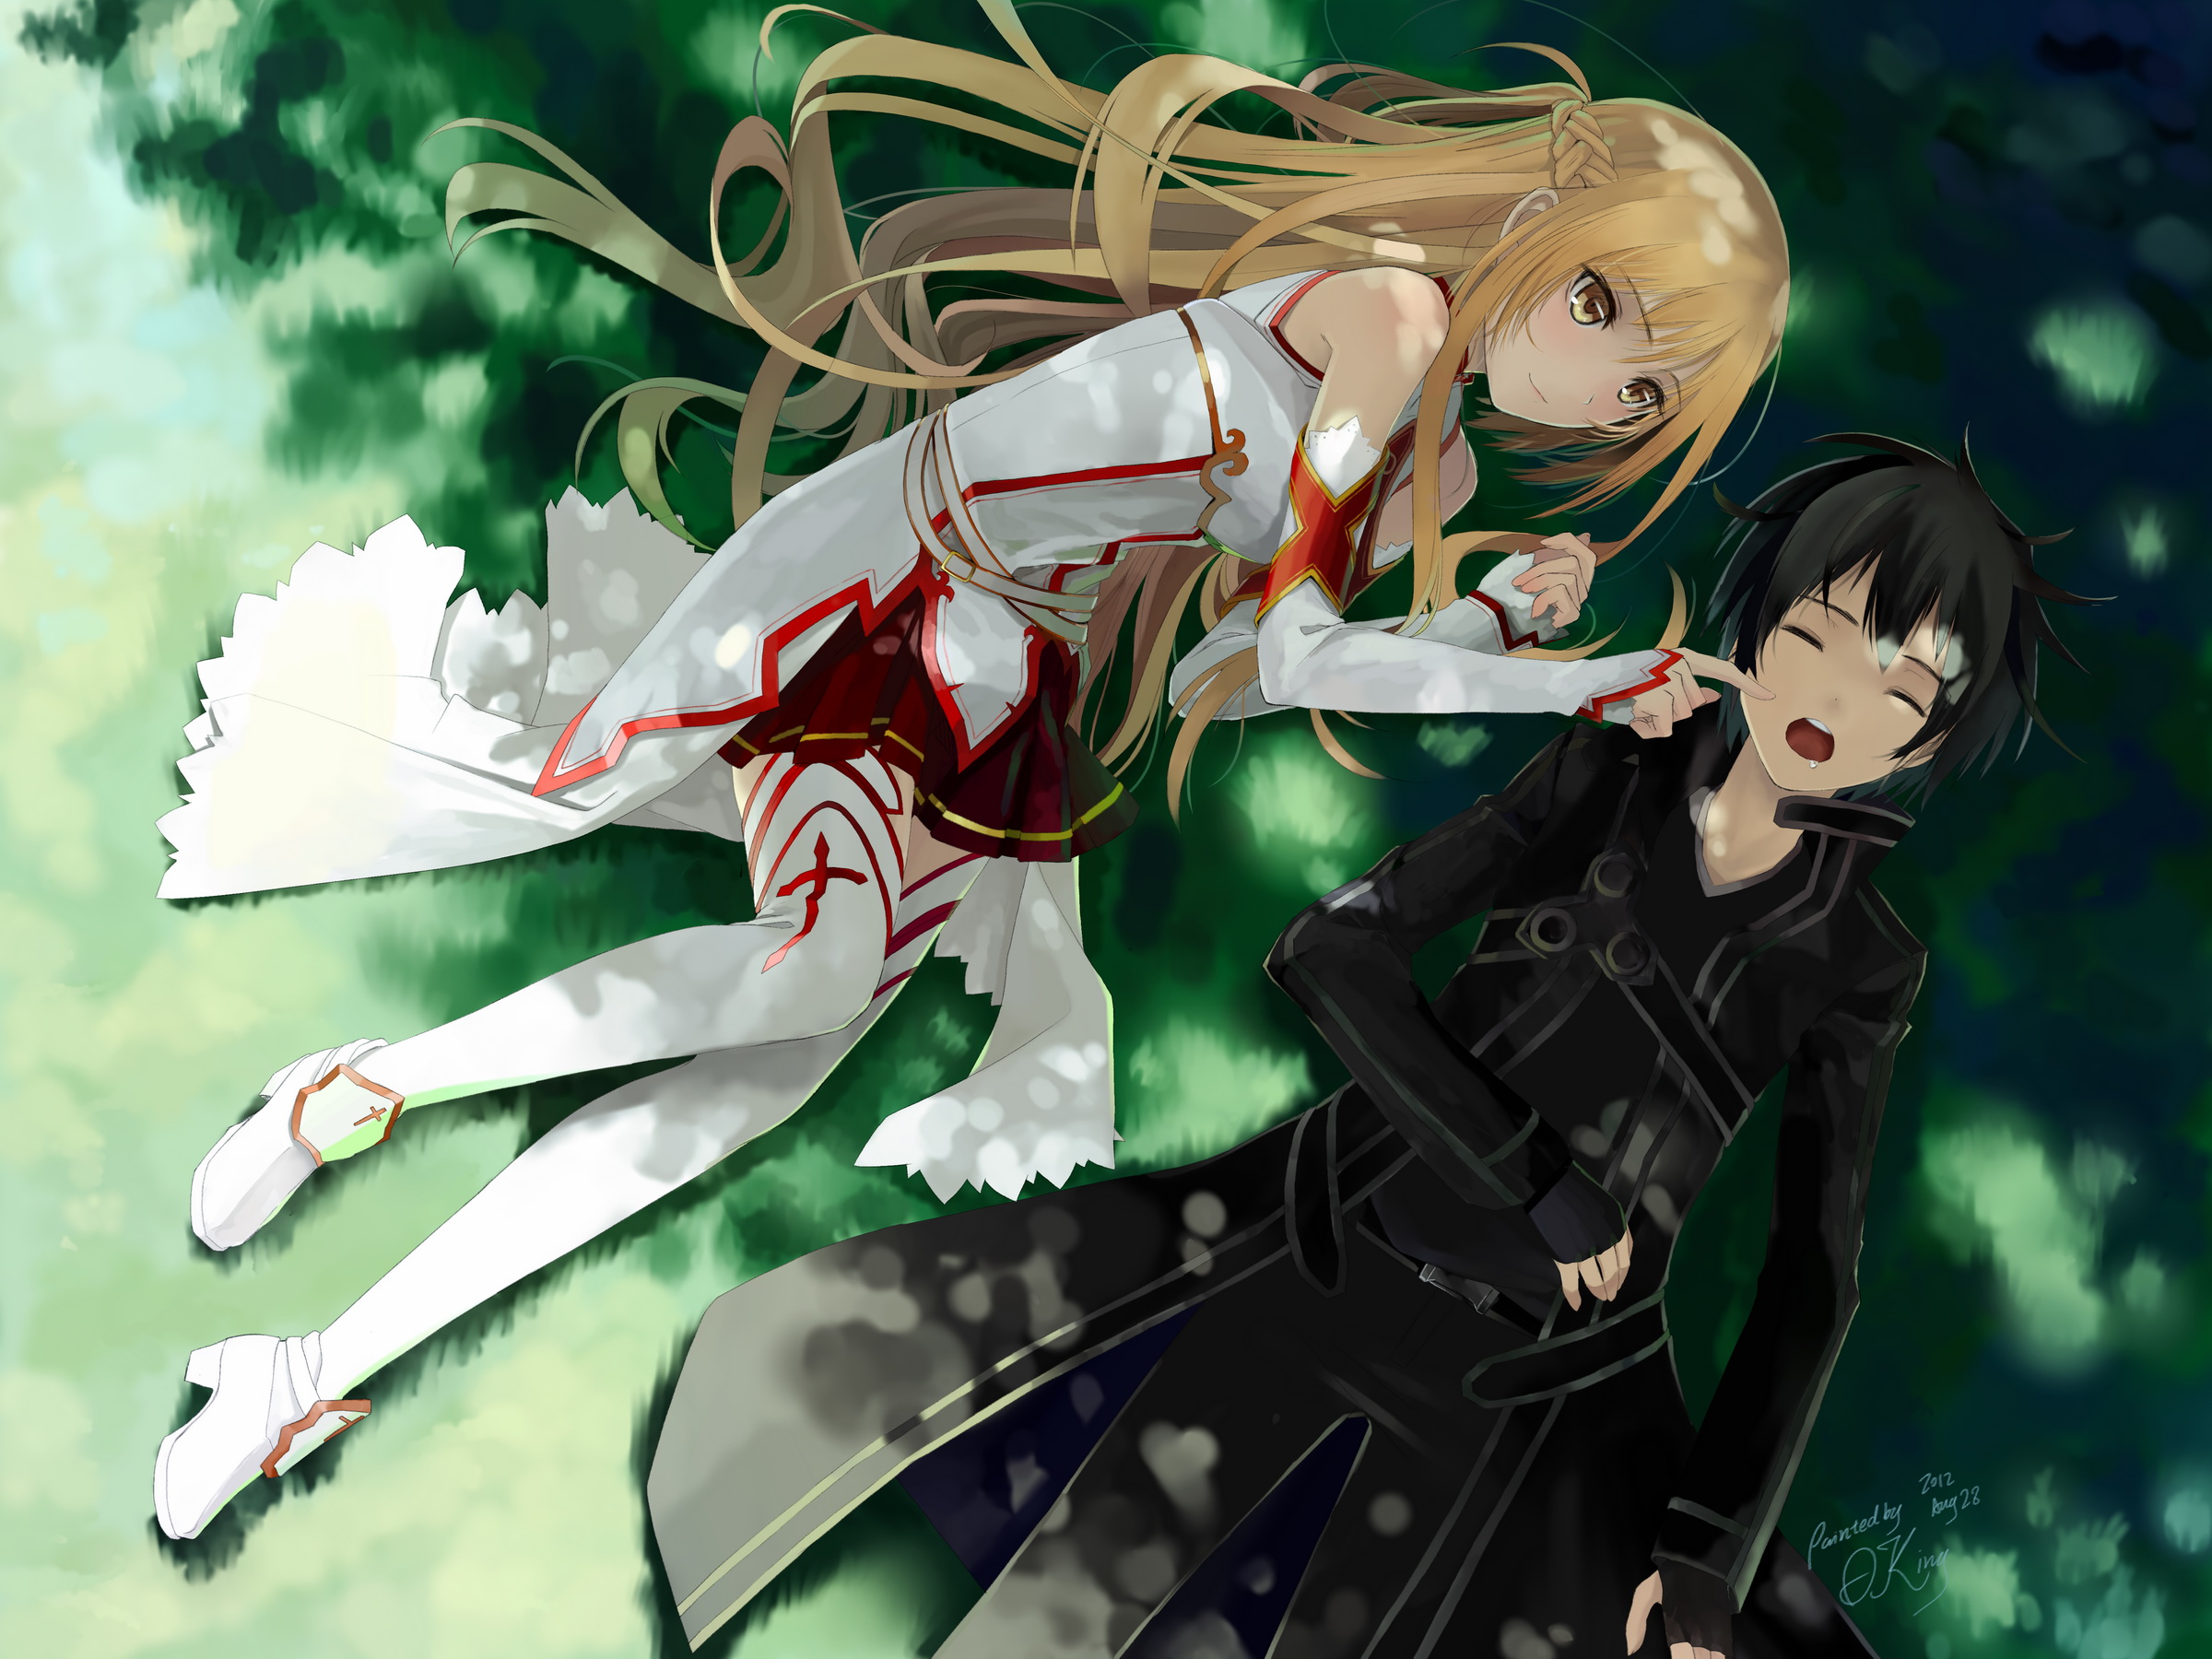 What Are You Doing?!?!, Anime Guy, Sword Art Online, Anime